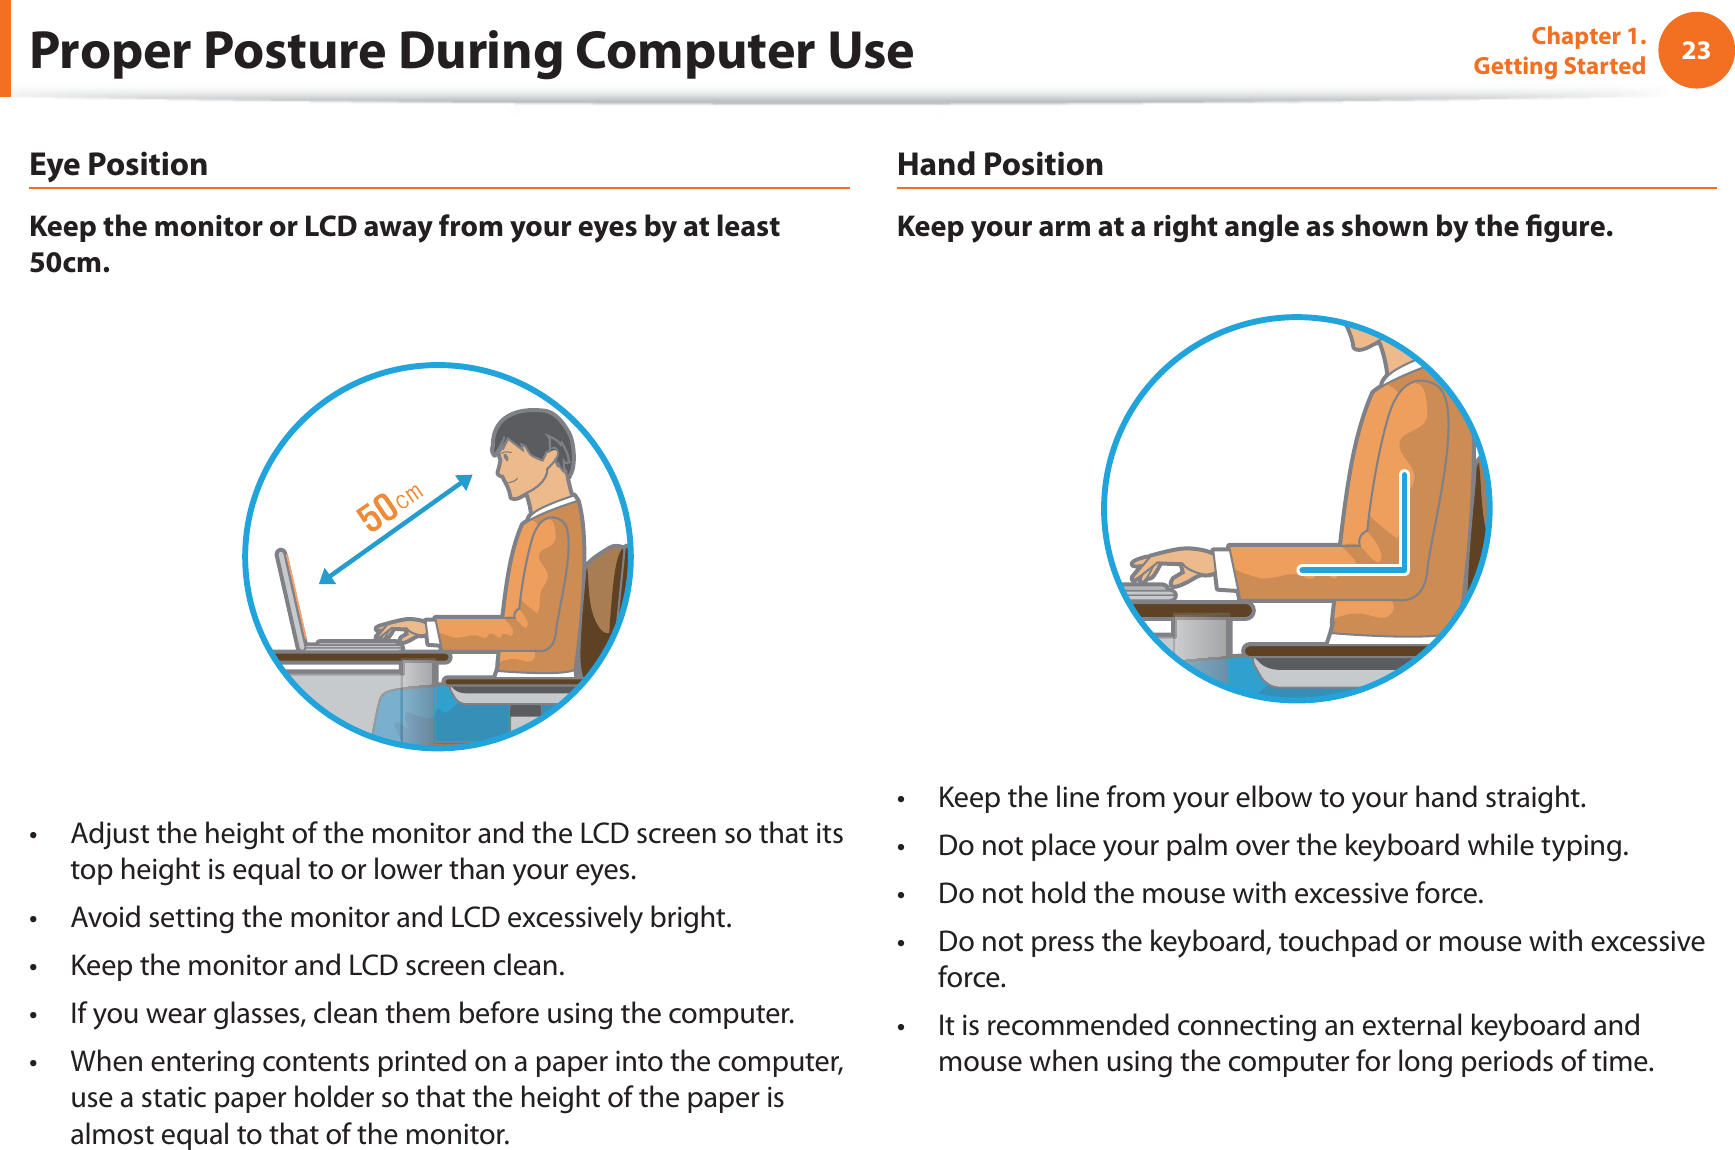 23Chapter 1. Getting StartedProper Posture During Computer UseEye PositionKeep the monitor or LCD away from your eyes by at least 50cm.Adjust the height of the monitor and the LCD screen so that its t top height is equal to or lower than your eyes.Avoid setting the monitor and LCD excessively bright.t Keep the monitor and LCD screen clean.t If you wear glasses, clean them before using the computer.t When entering contents printed on a paper into the computer, t use a static paper holder so that the height of the paper is almost equal to that of the monitor.Hand PositionKeep your arm at a right angle as shown by the ﬁ gure.Keep the line from your elbow to your hand straight.t Do not place your palm over the keyboard while typing.t Do not hold the mouse with excessive force.t Do not press the keyboard, touchpad or mouse with excessive t force.It is recommended connecting an external keyboard and t mouse when using the computer for long periods of time.